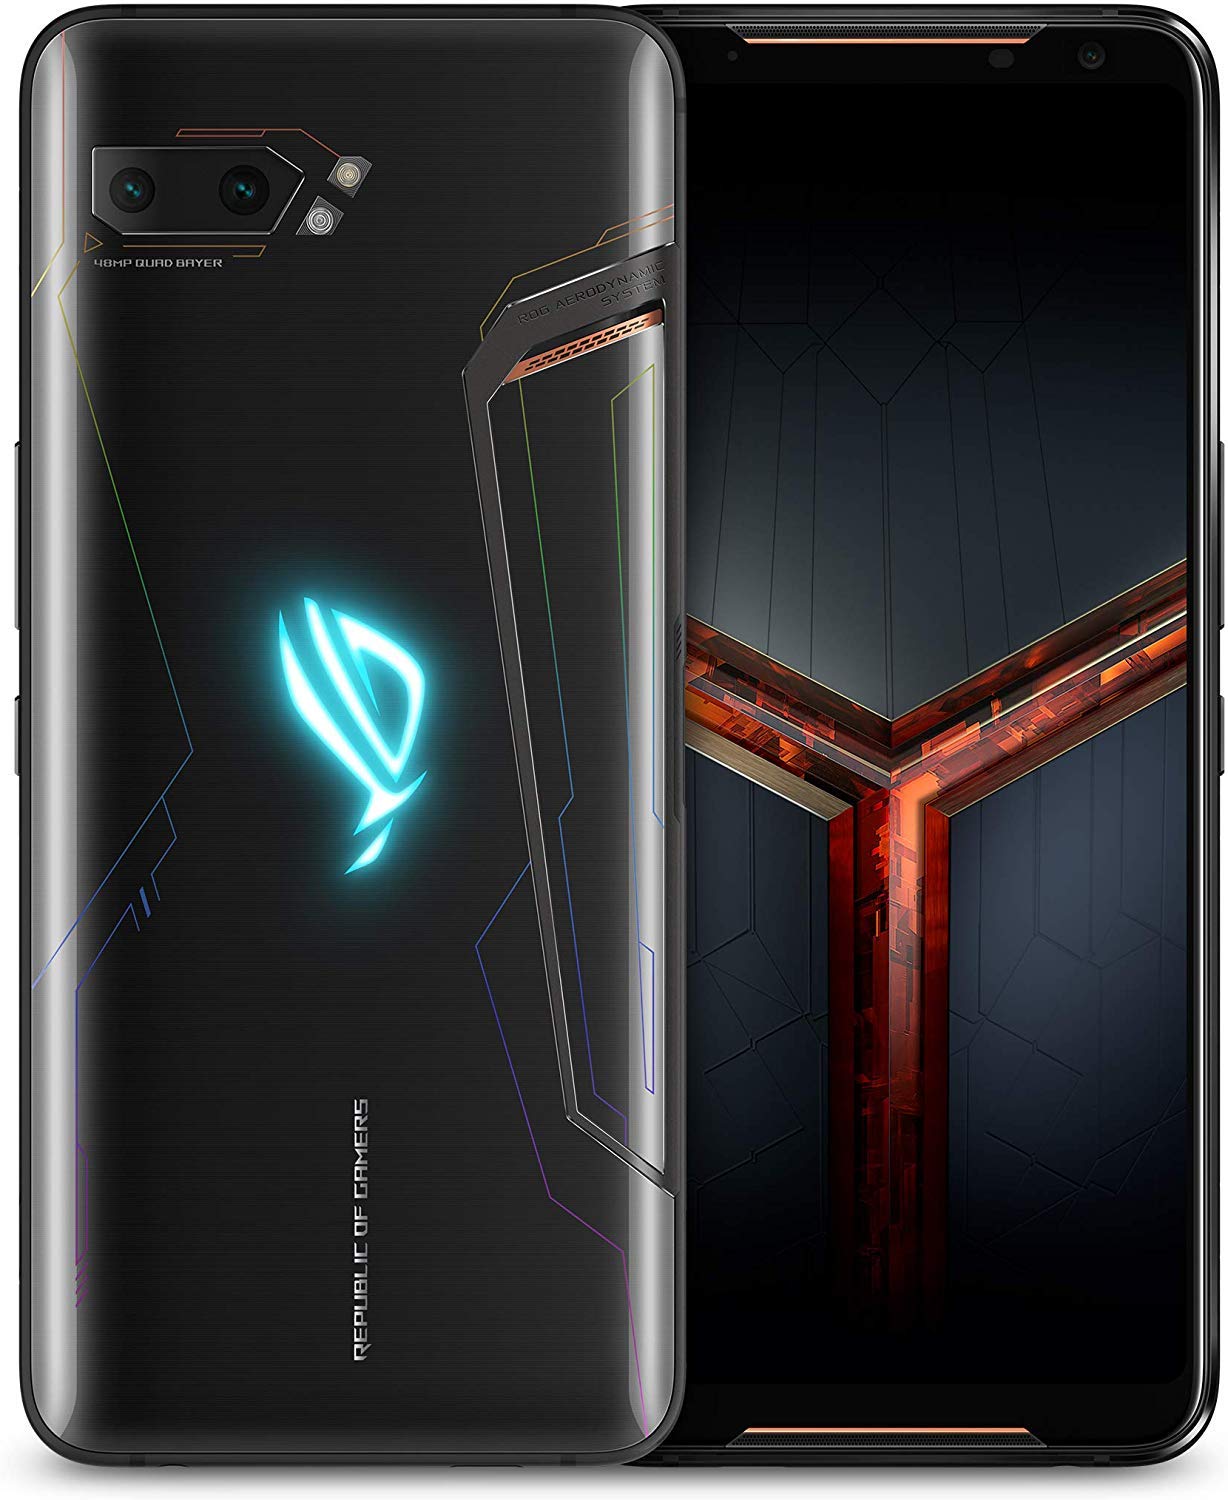 ASUS ROG Phone 2 (ZS660KL) Smartphone 128GB ROM 8GB RAM Snapdragon 855 Plus 6000 mAh NFC Android 9.0 - GSM Only International Version, No Warranty (Black)